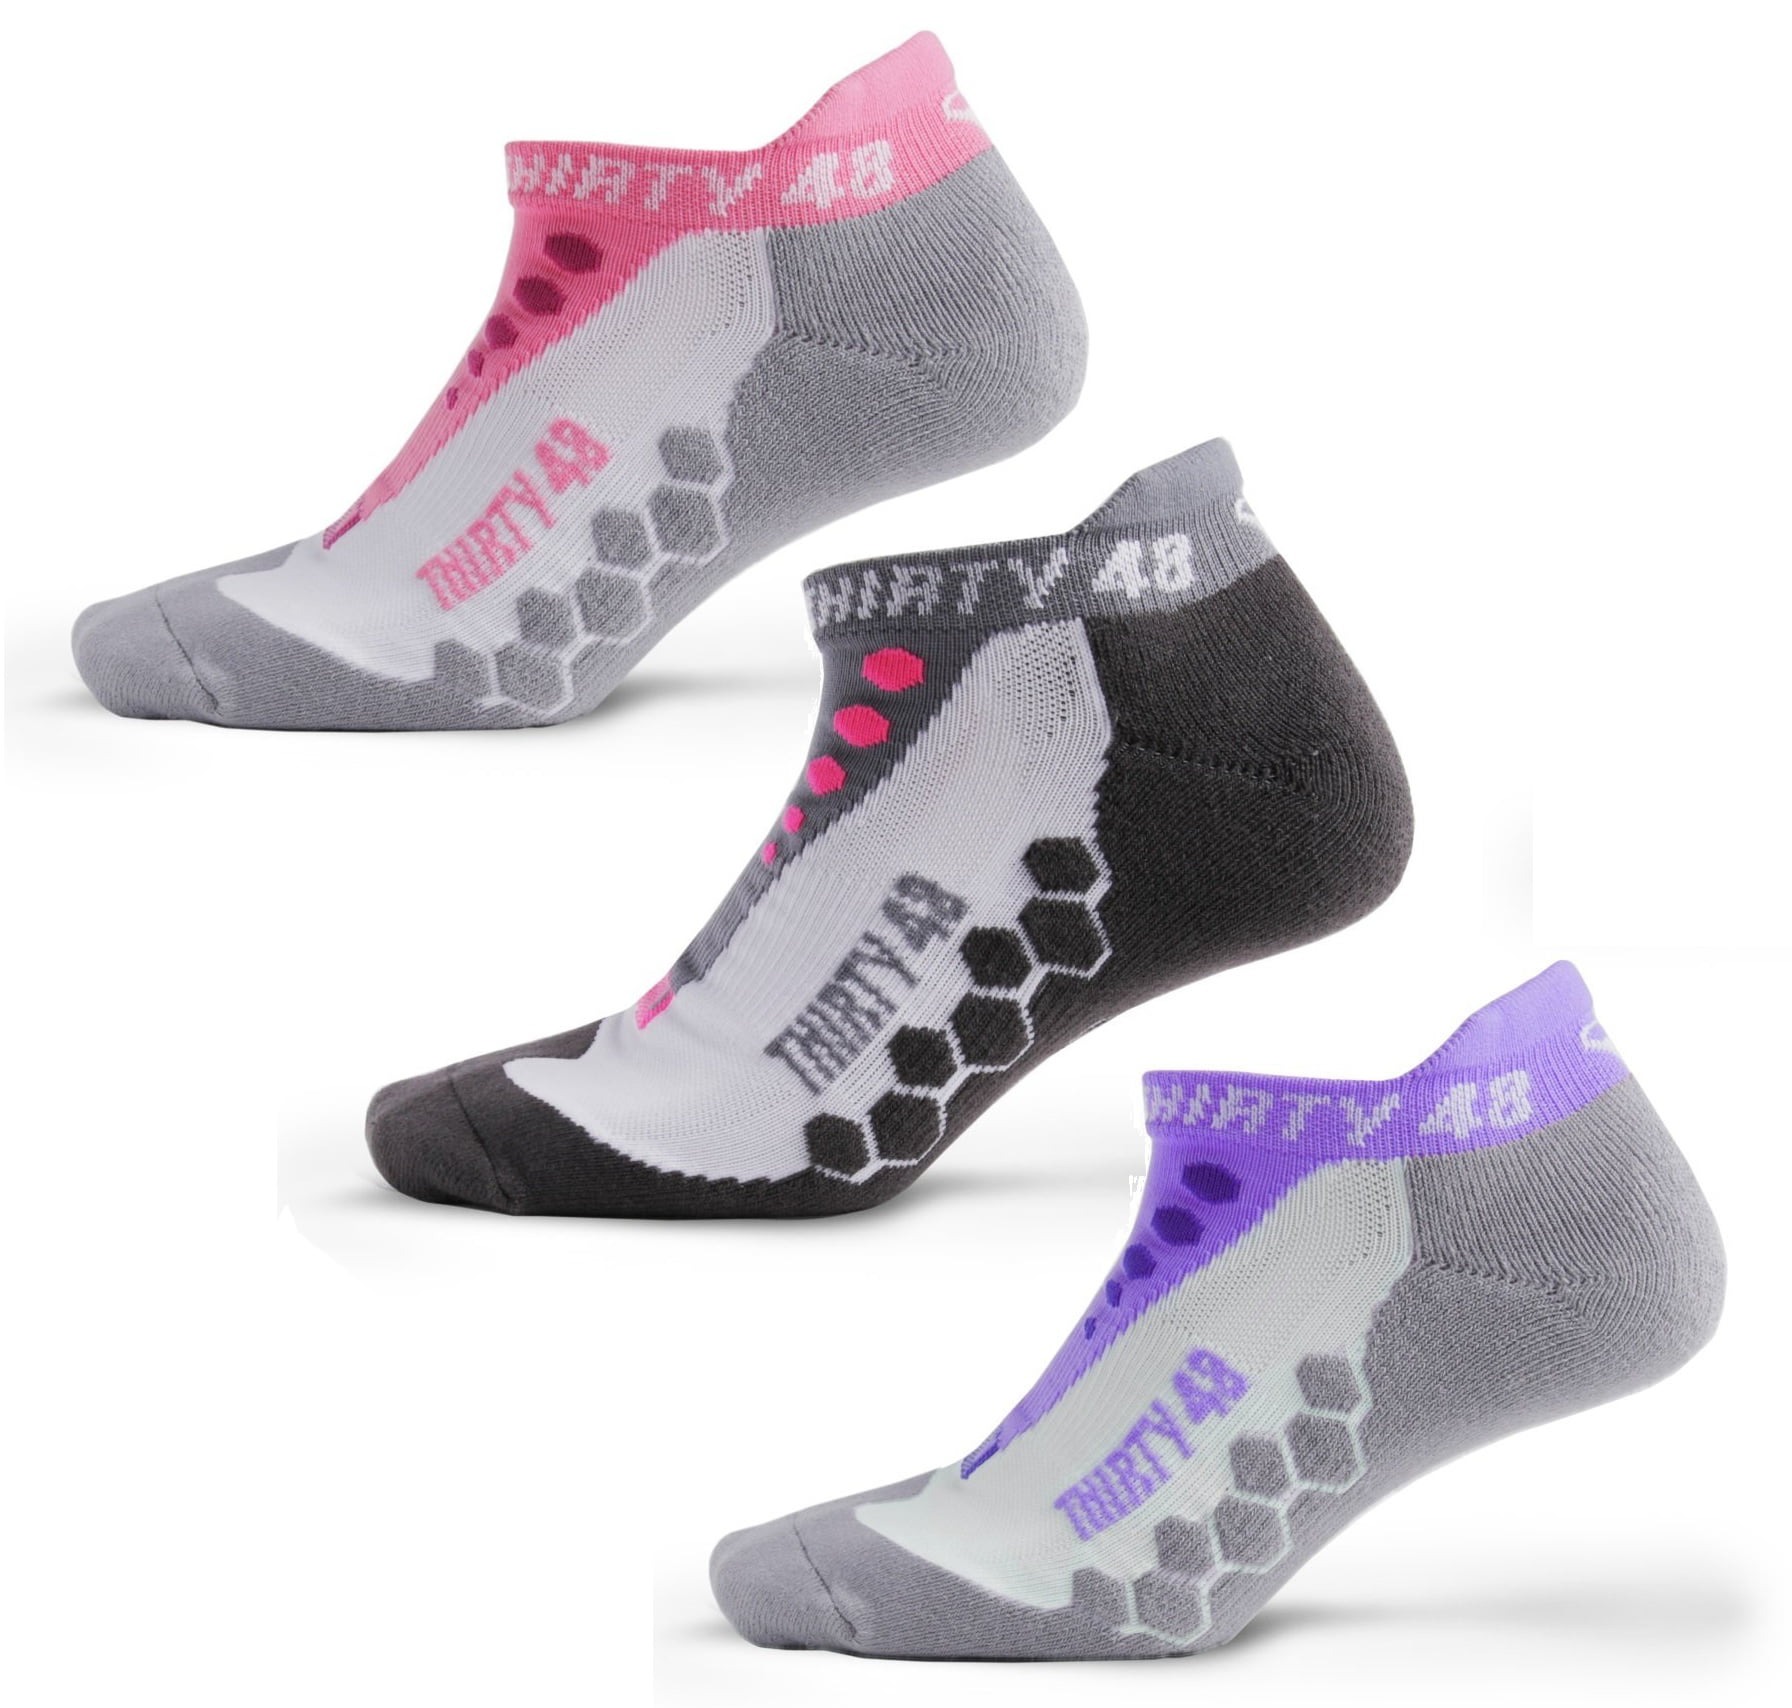 3 Pair or 6 Pair Thirty 48 Thirty48 Running Socks for Men and Women by Features Coolmax Fabric That Keeps Feet Cool /& Dry 1 Pair